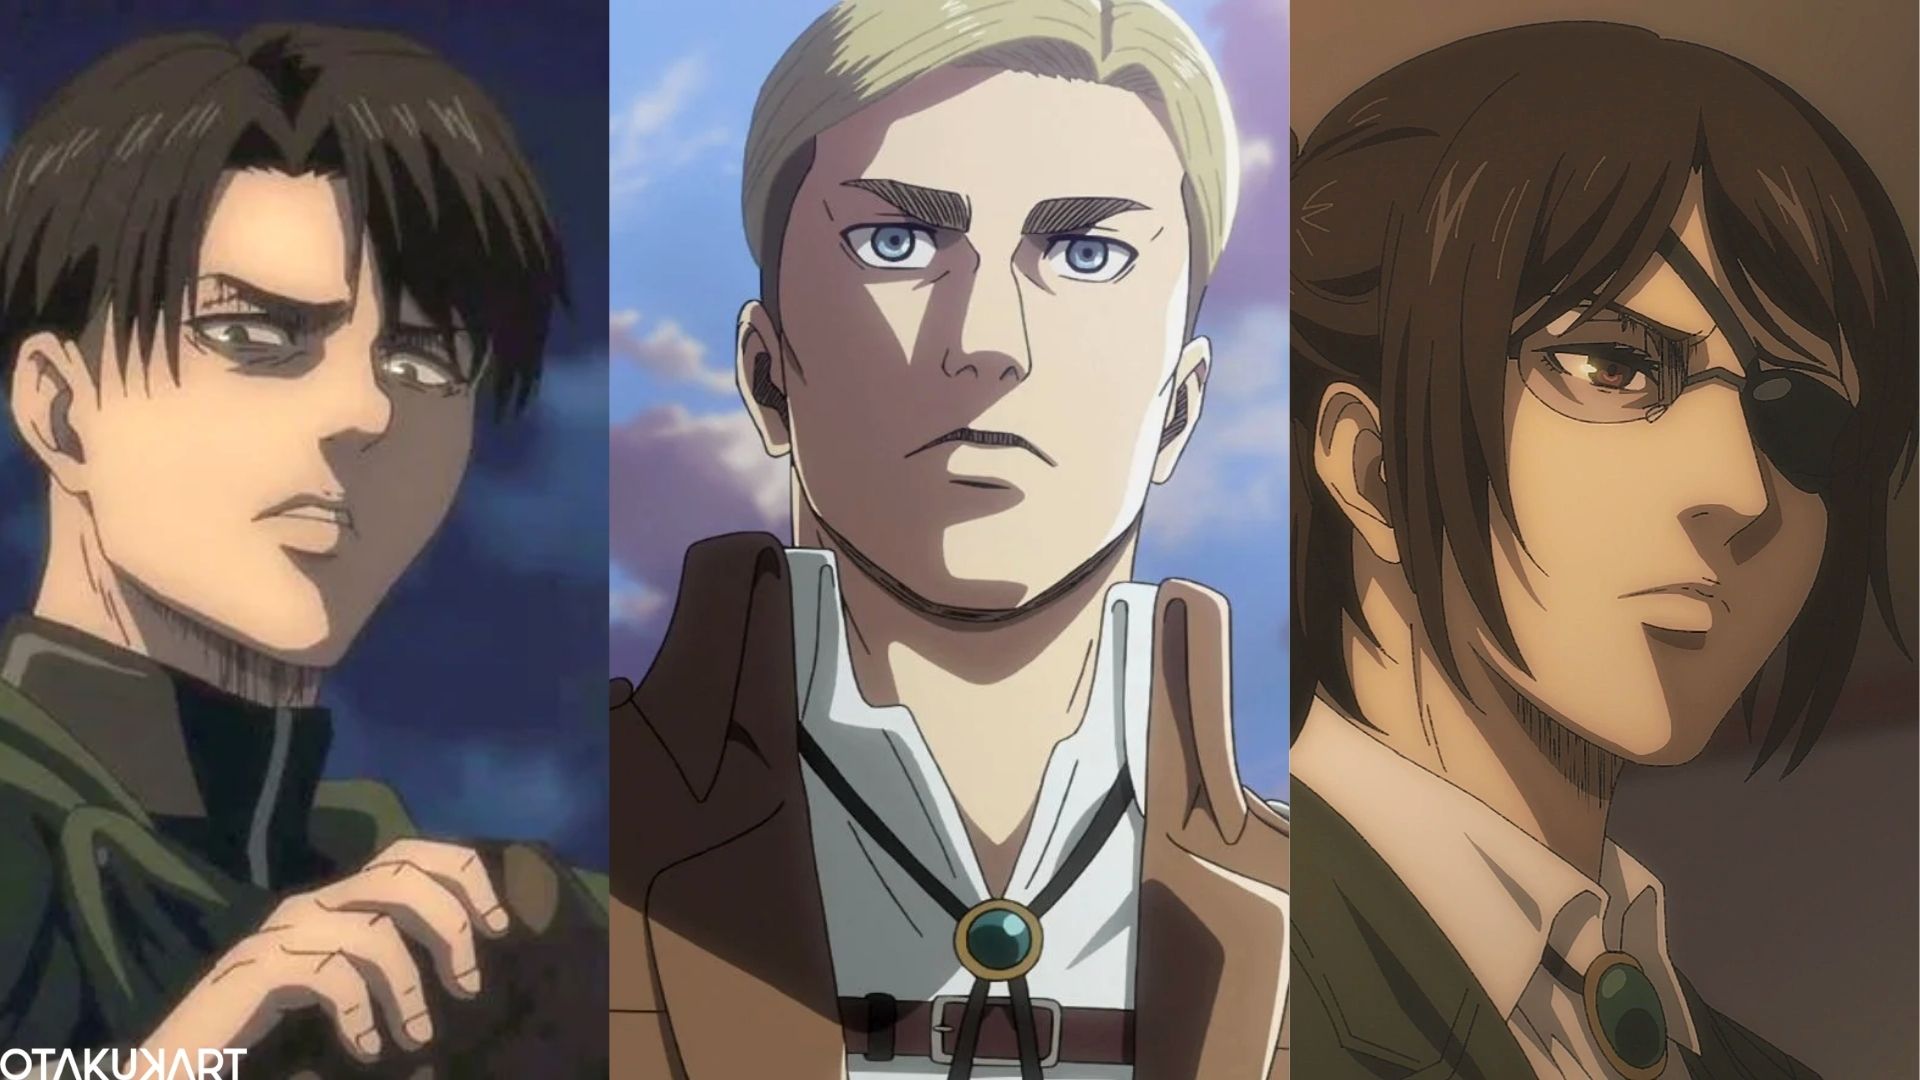 Why Should You Watch AOT? Here Are The Top 10 Reasons To Watch Attack On Titan